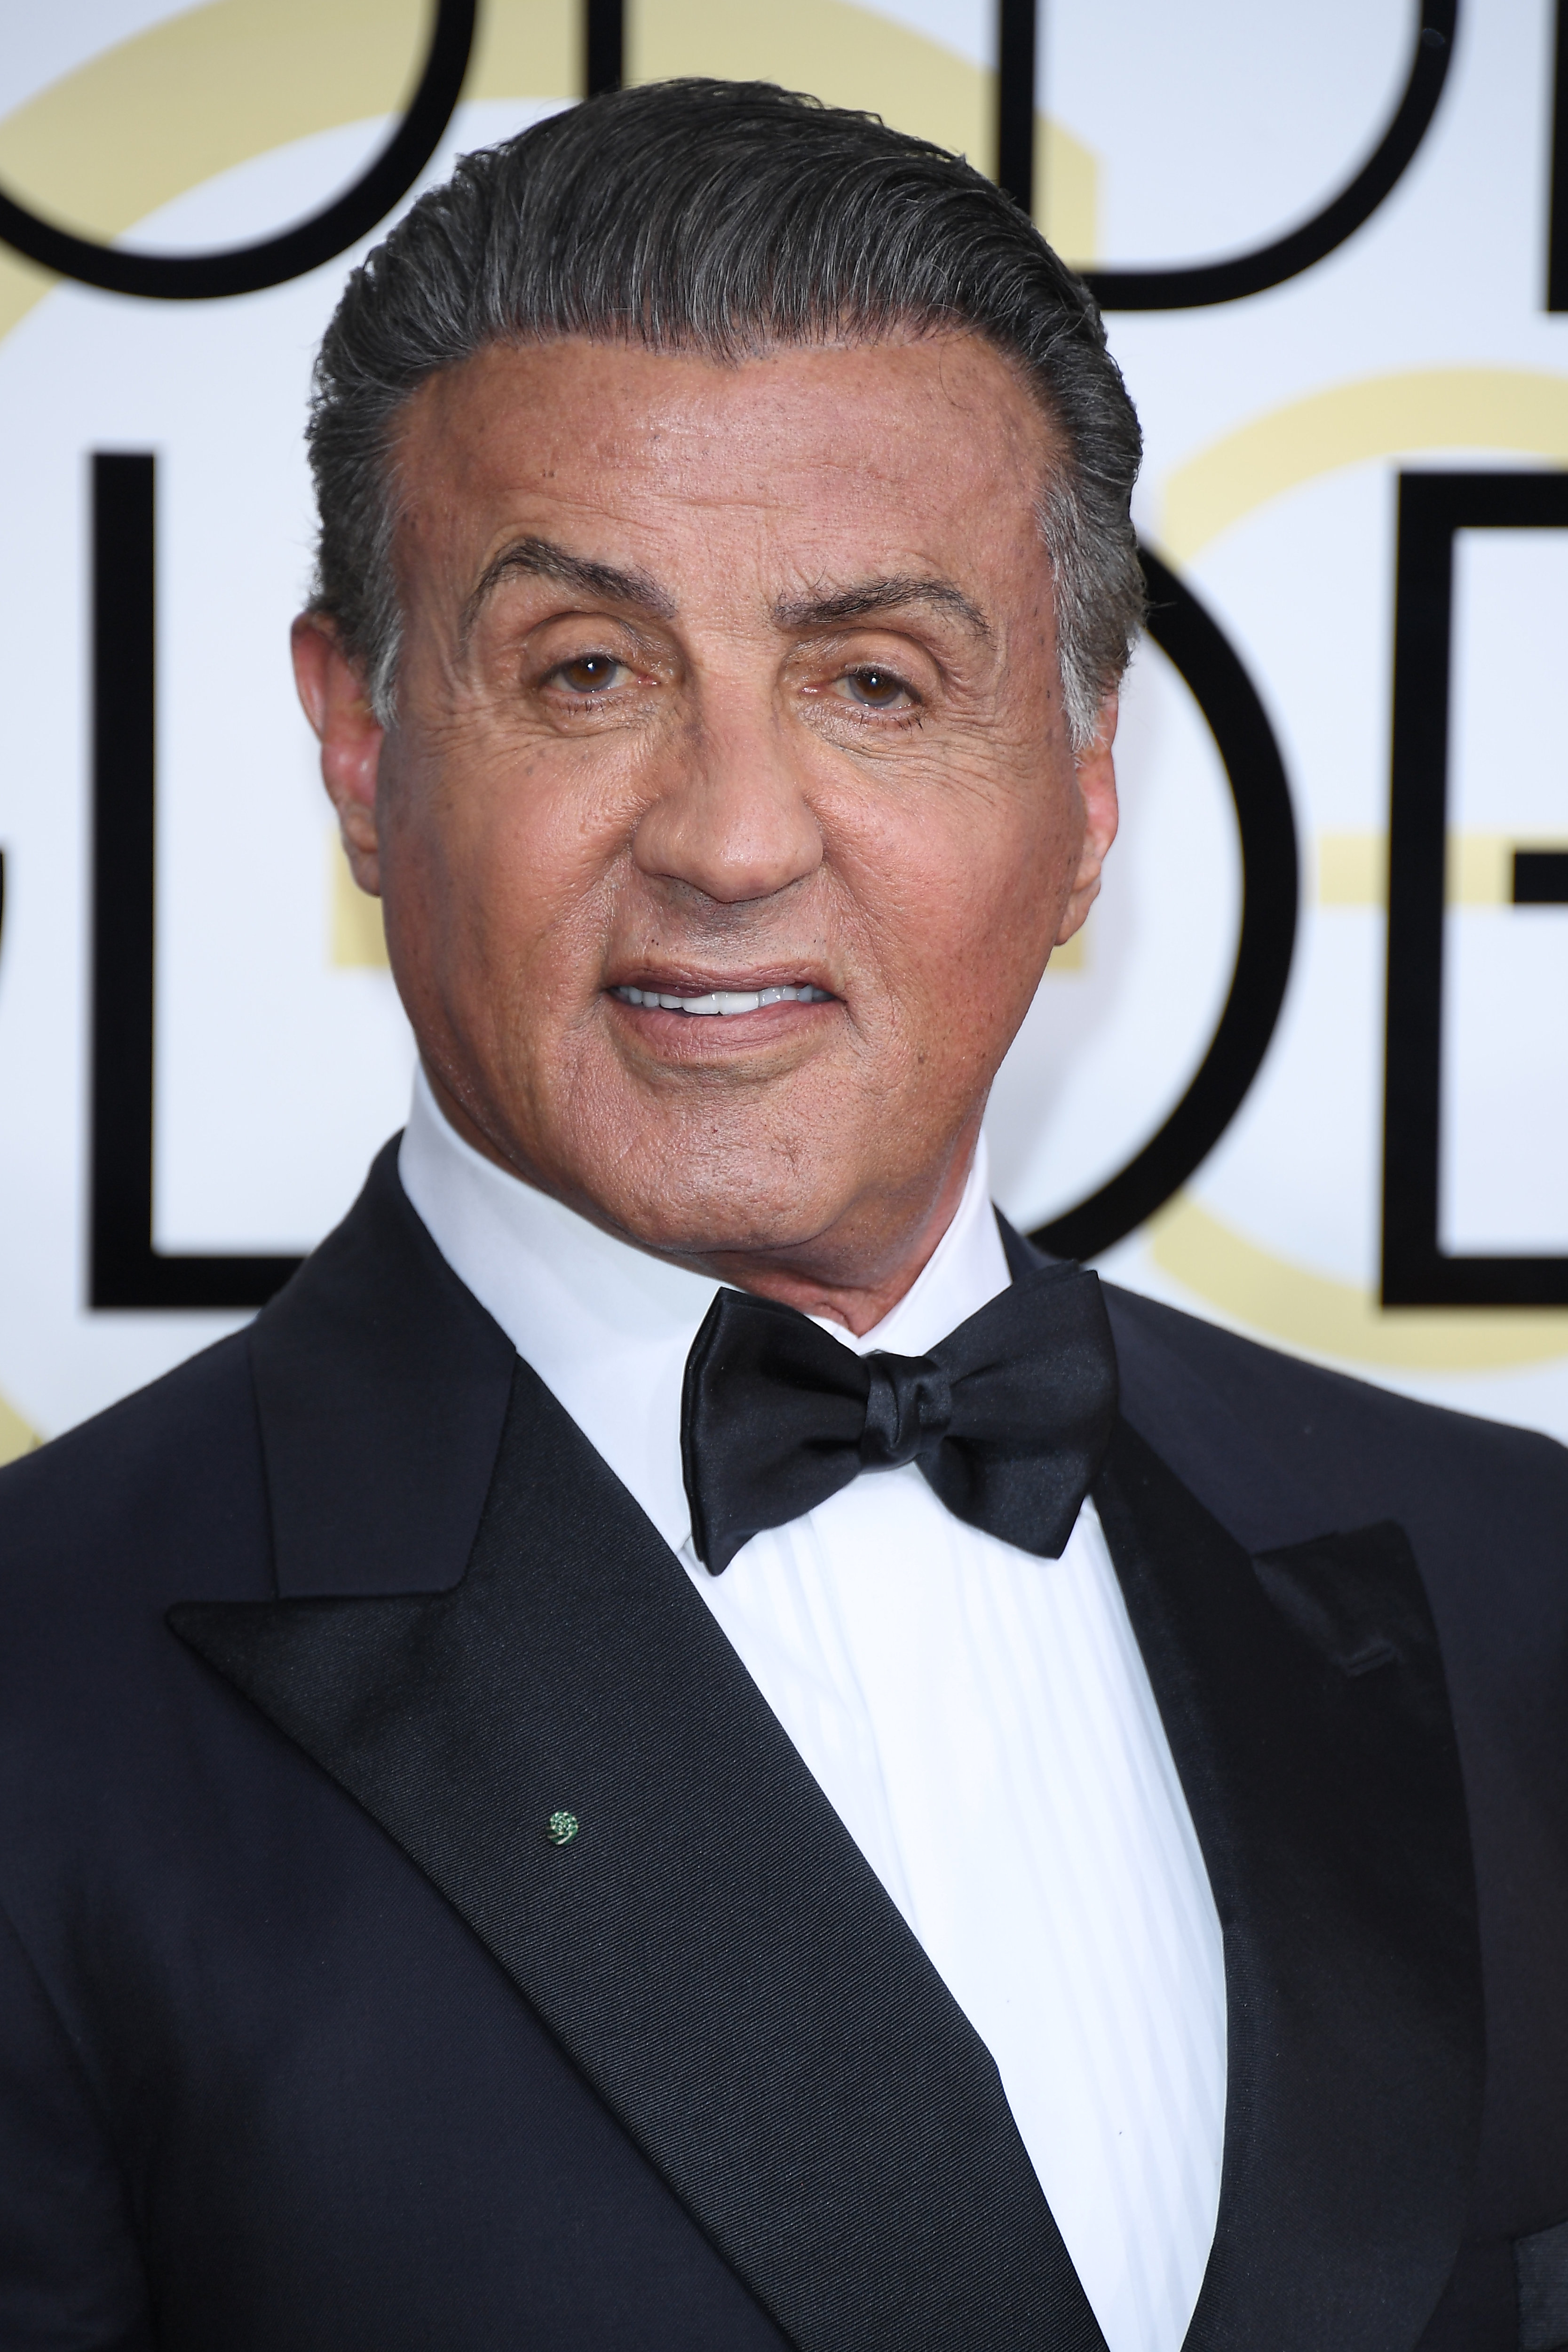 Sylvester Stallone at the 74th Annual Golden Globe Awards on January 8, 2017, in Beverly Hills, California. | Source: Getty Images